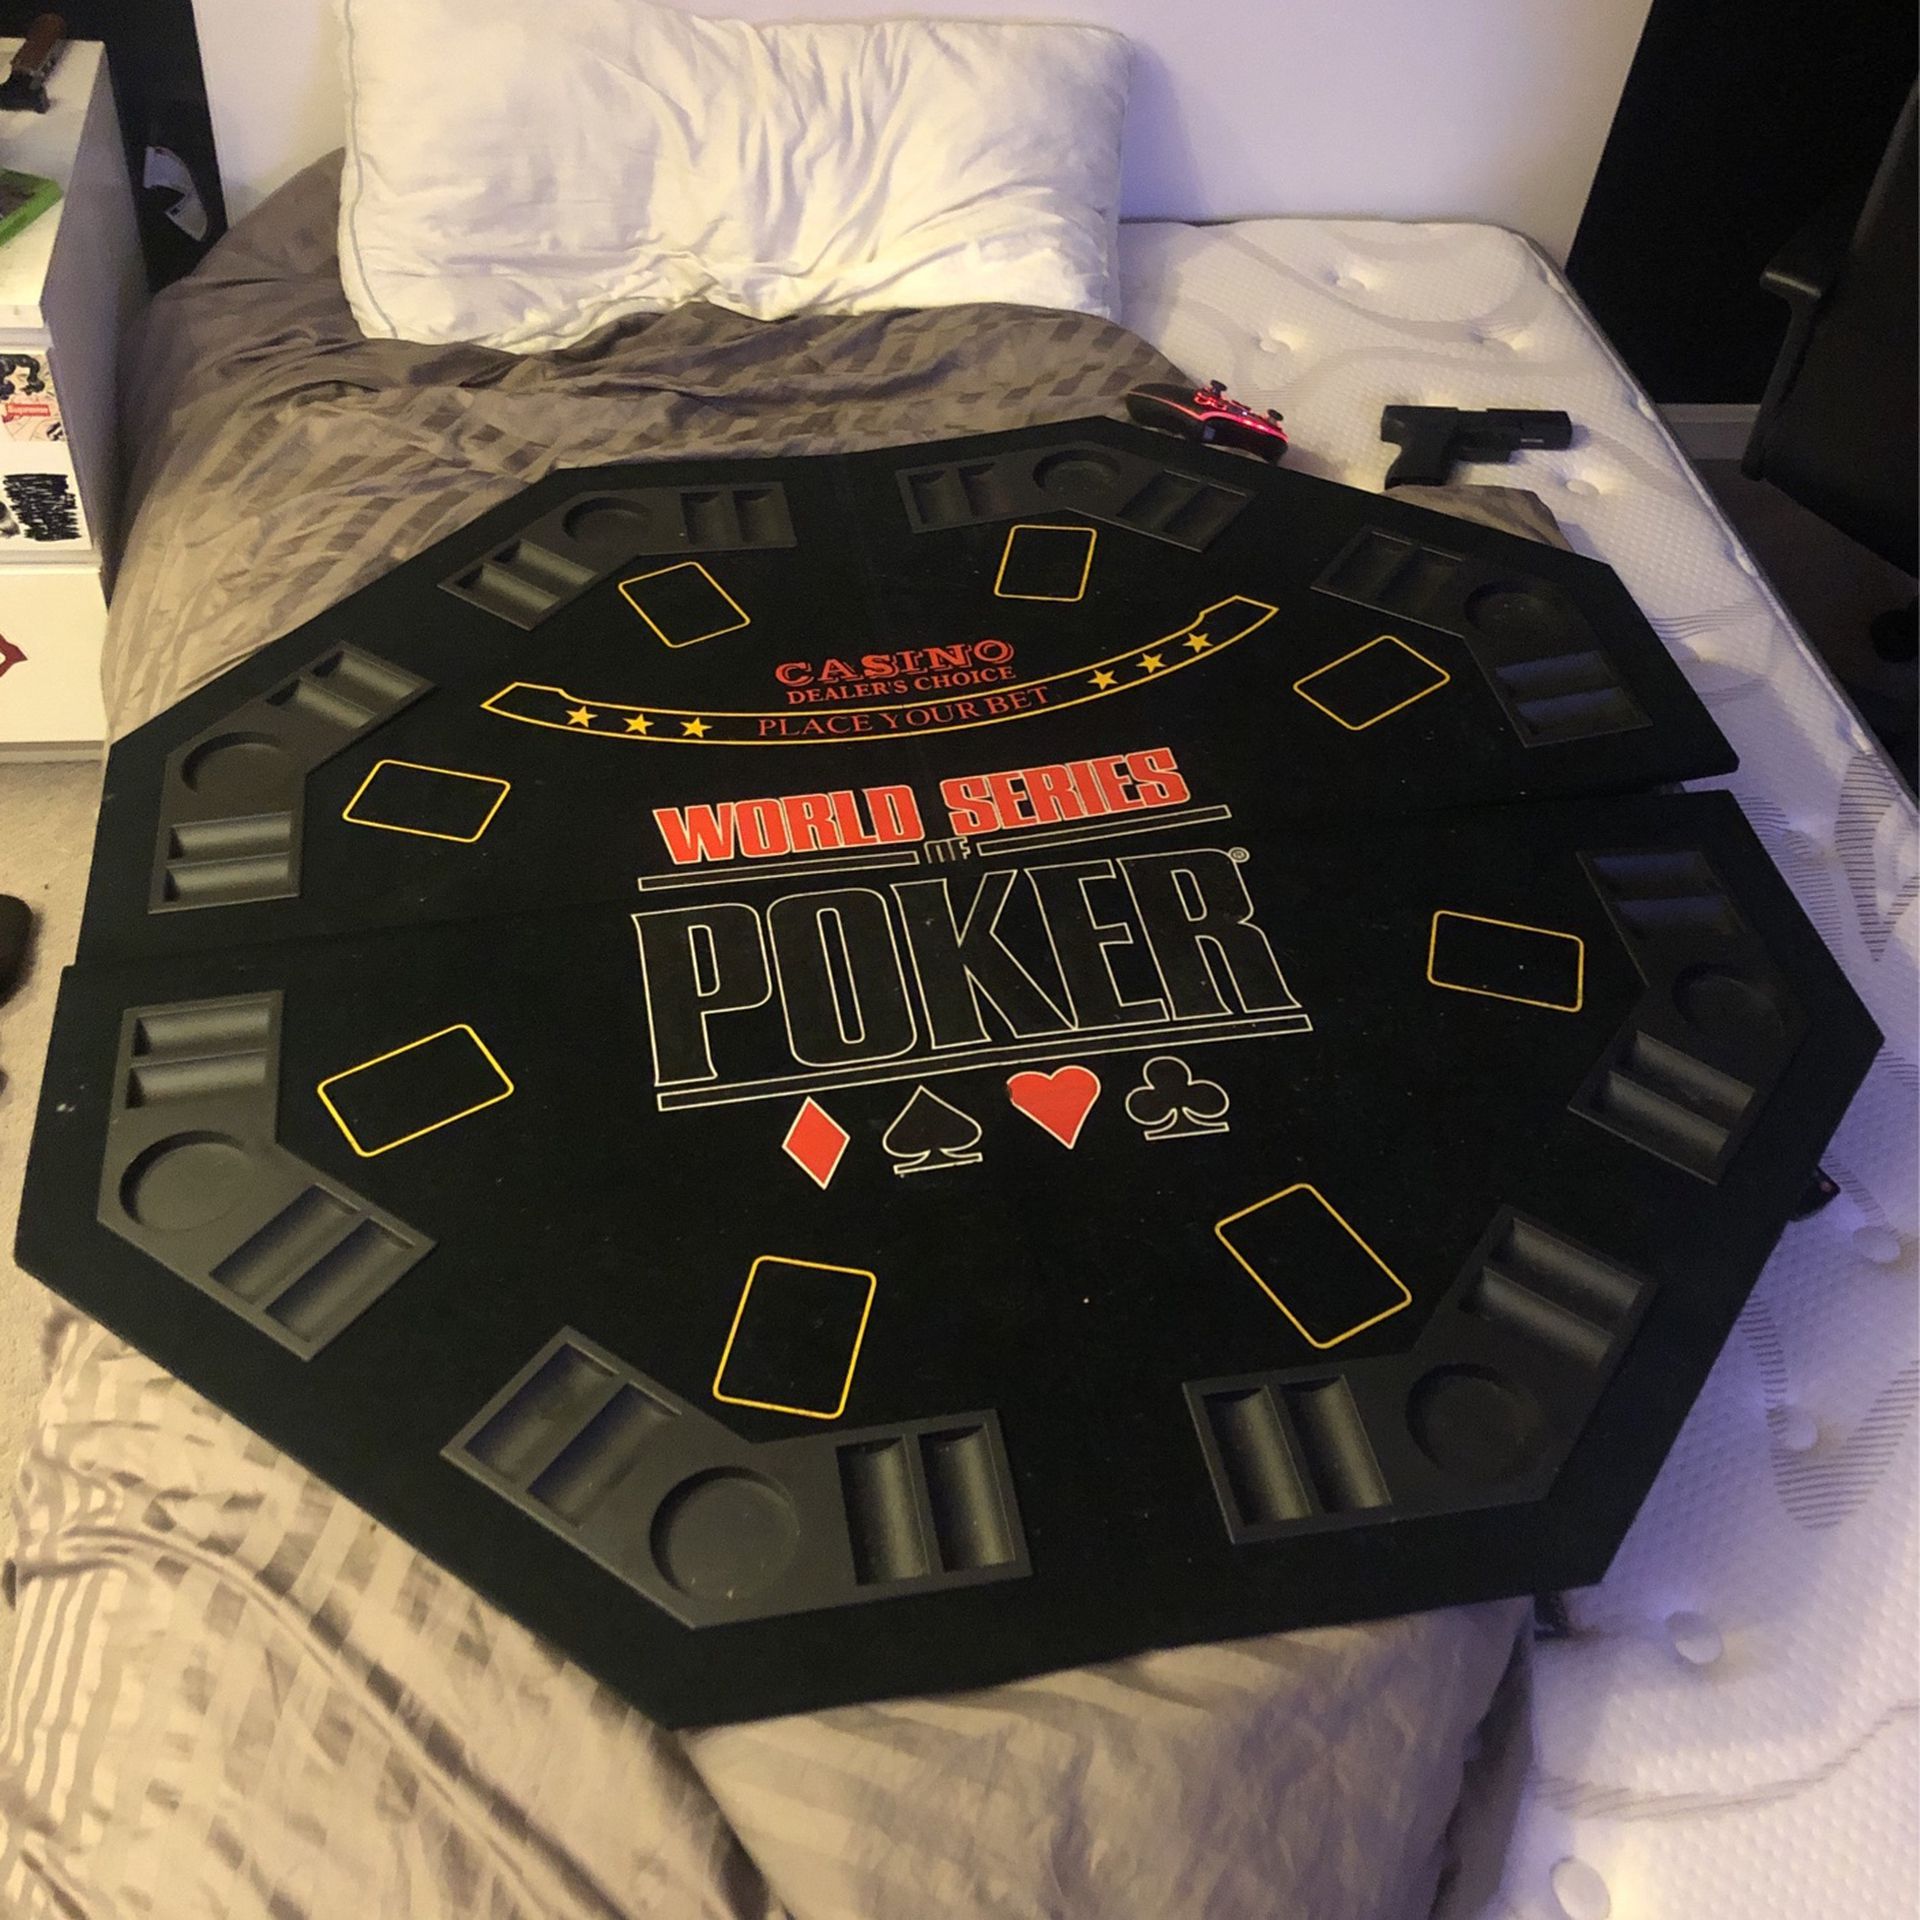 WSOP poker table top with chip holders and cup holders